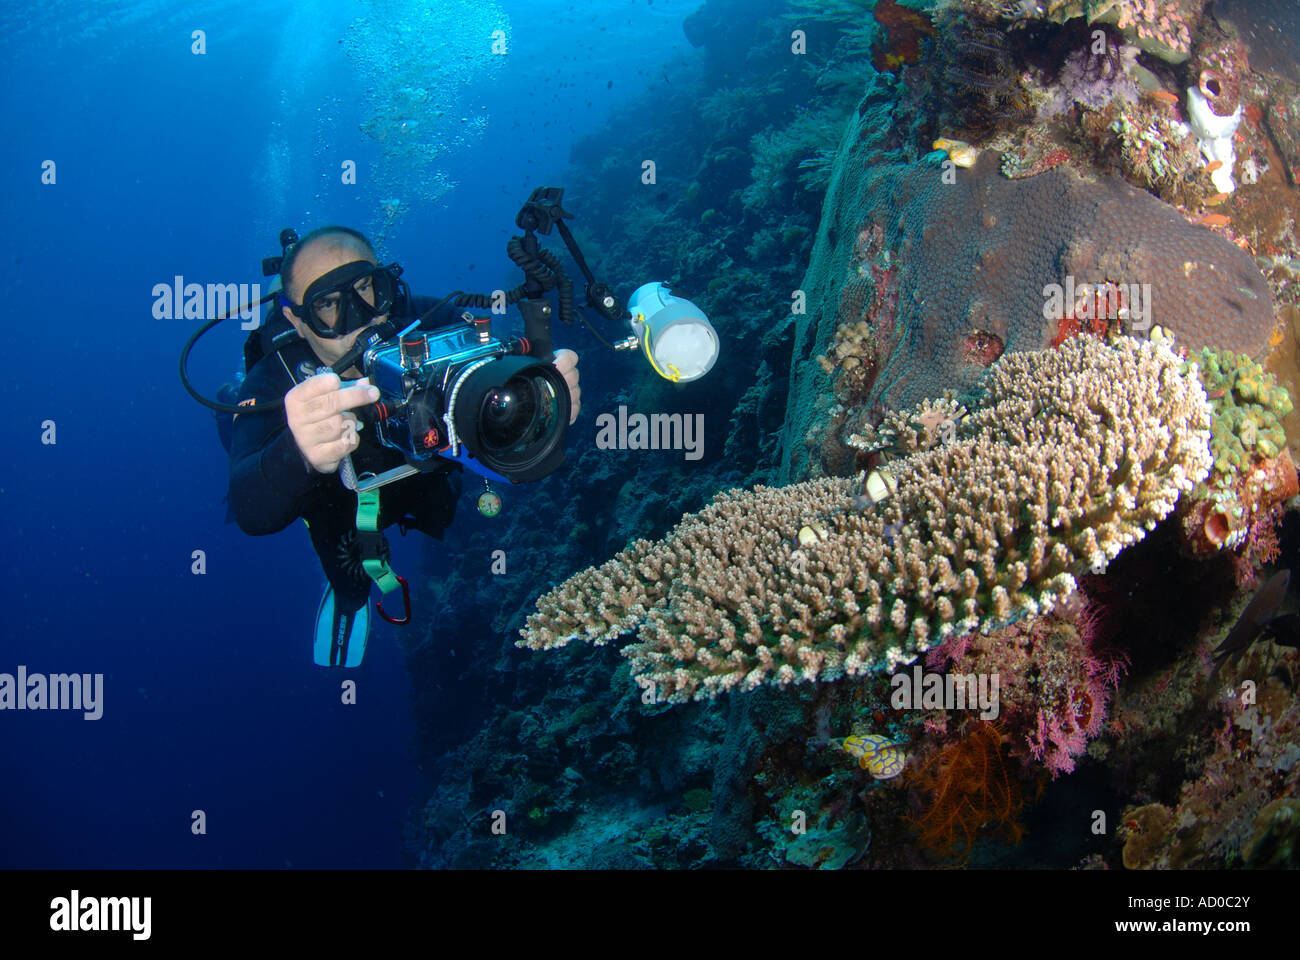 diver with camera and coral, underwater, Indonesia, Siladen, scuba, diving, ocean, sea, coral reef, blue water, tropical reef Stock Photo